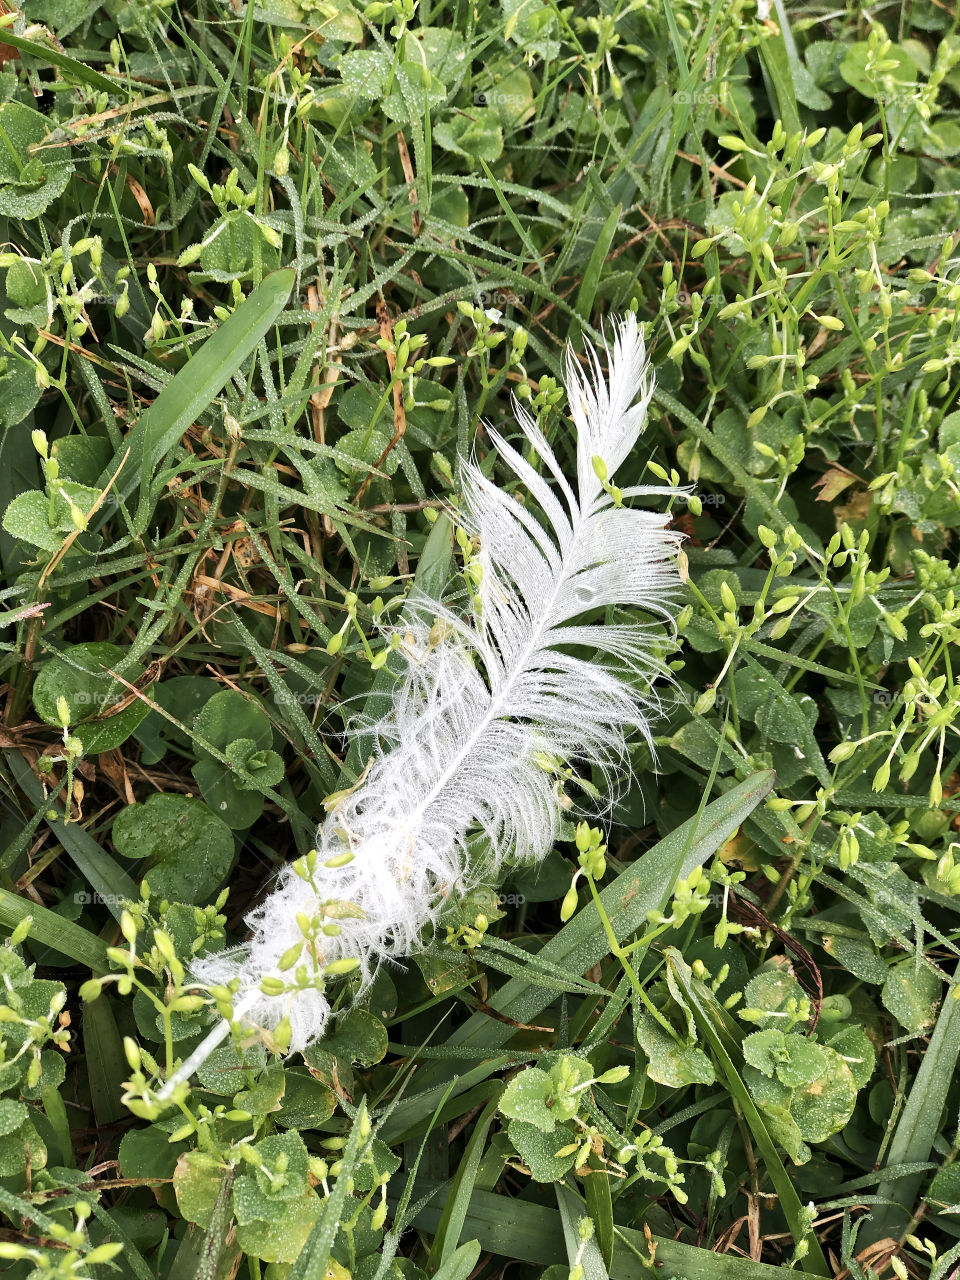 White Feather in the Grass